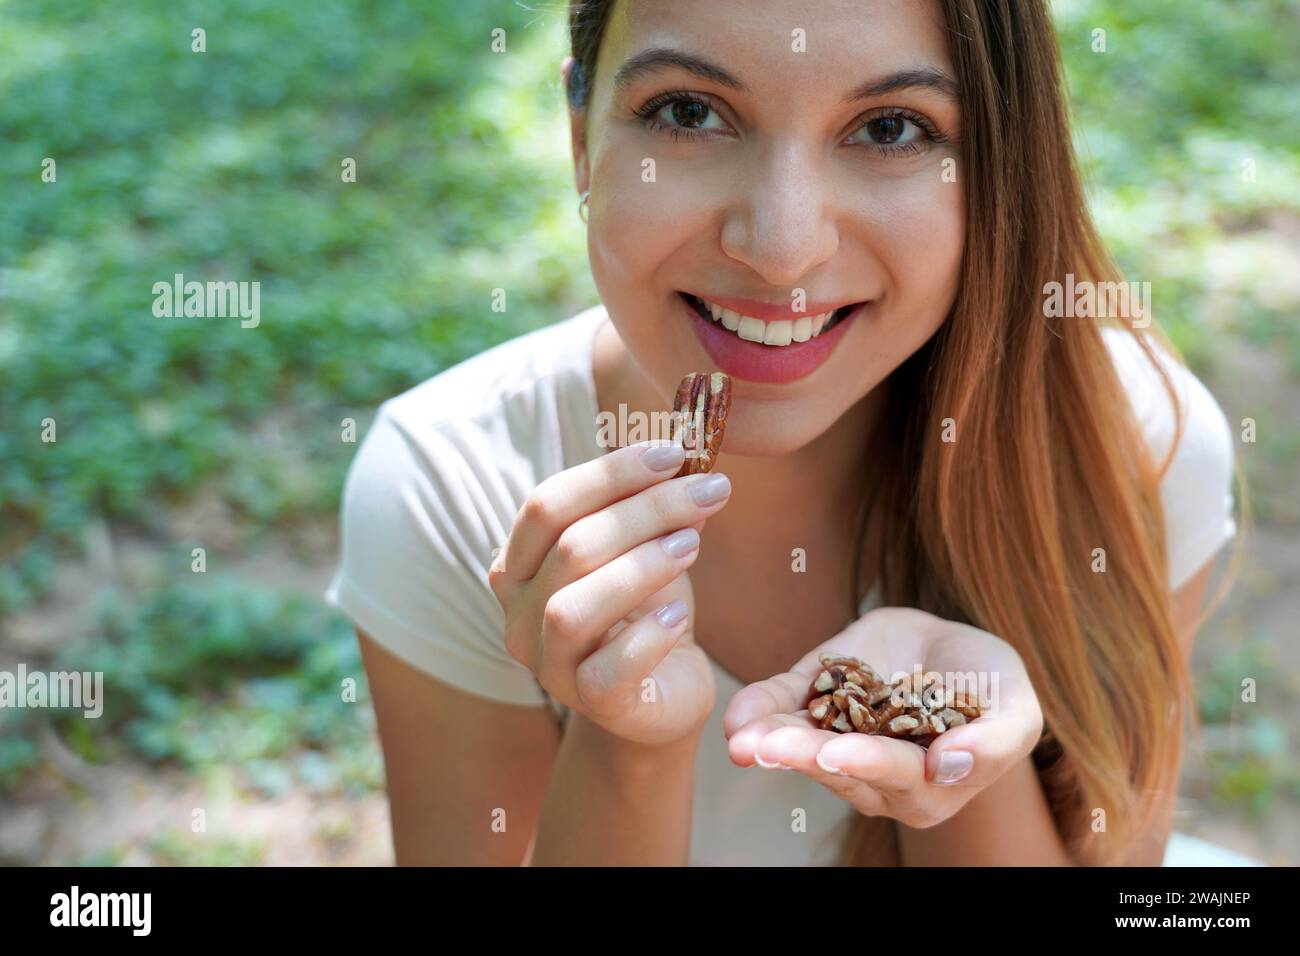 Close-up of healthy woman eating pecan nuts in the park. Looks at camera. Stock Photo